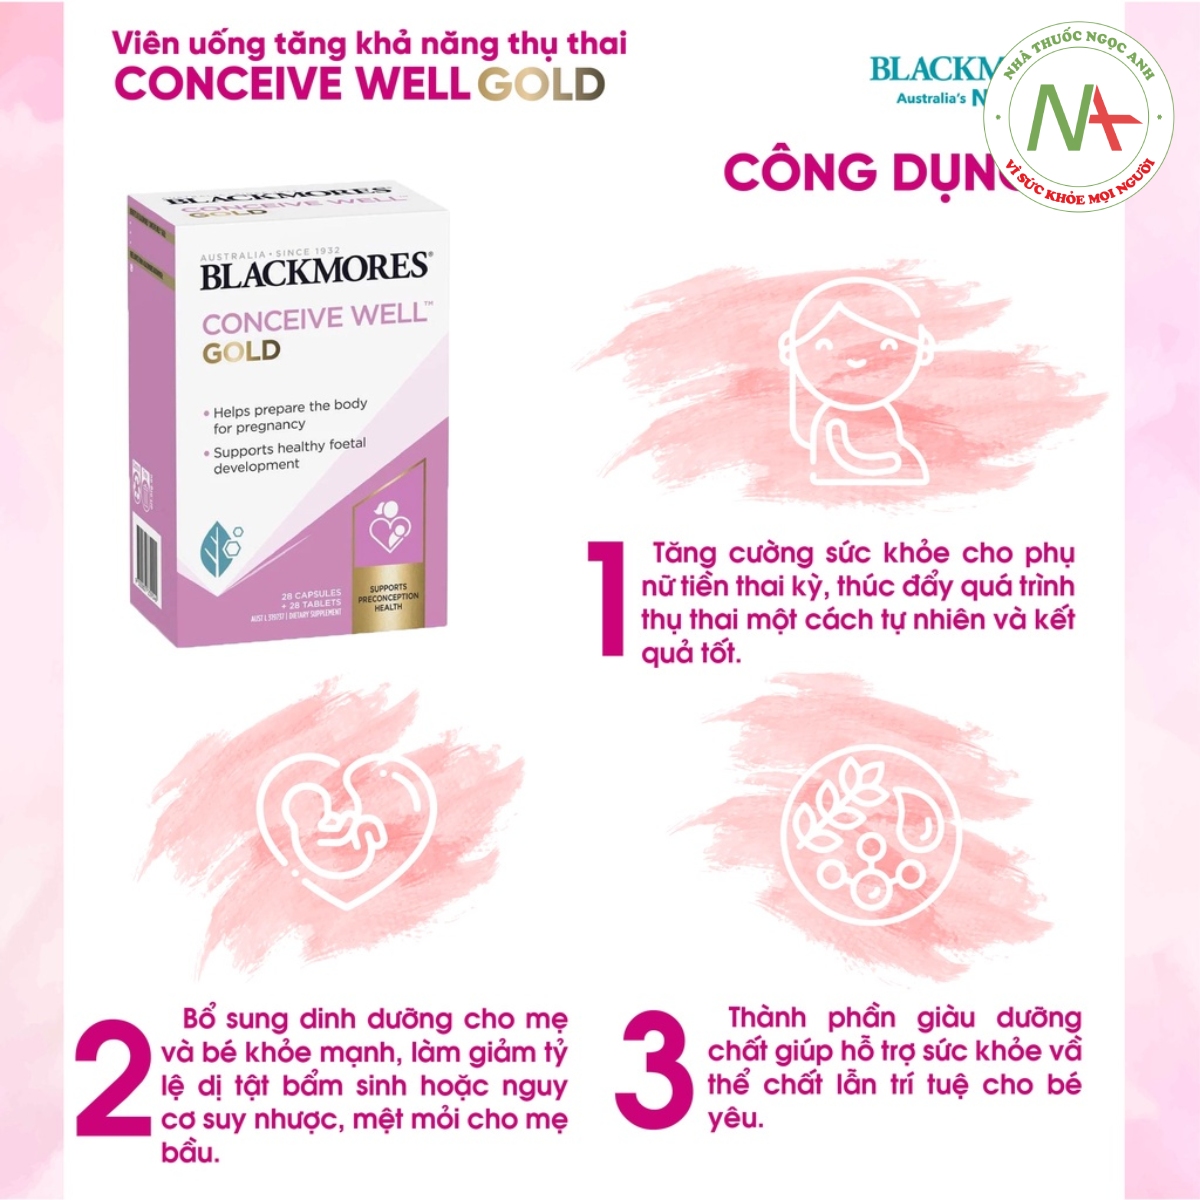 Hiệu quả của Blackmores Conceive Well Gold